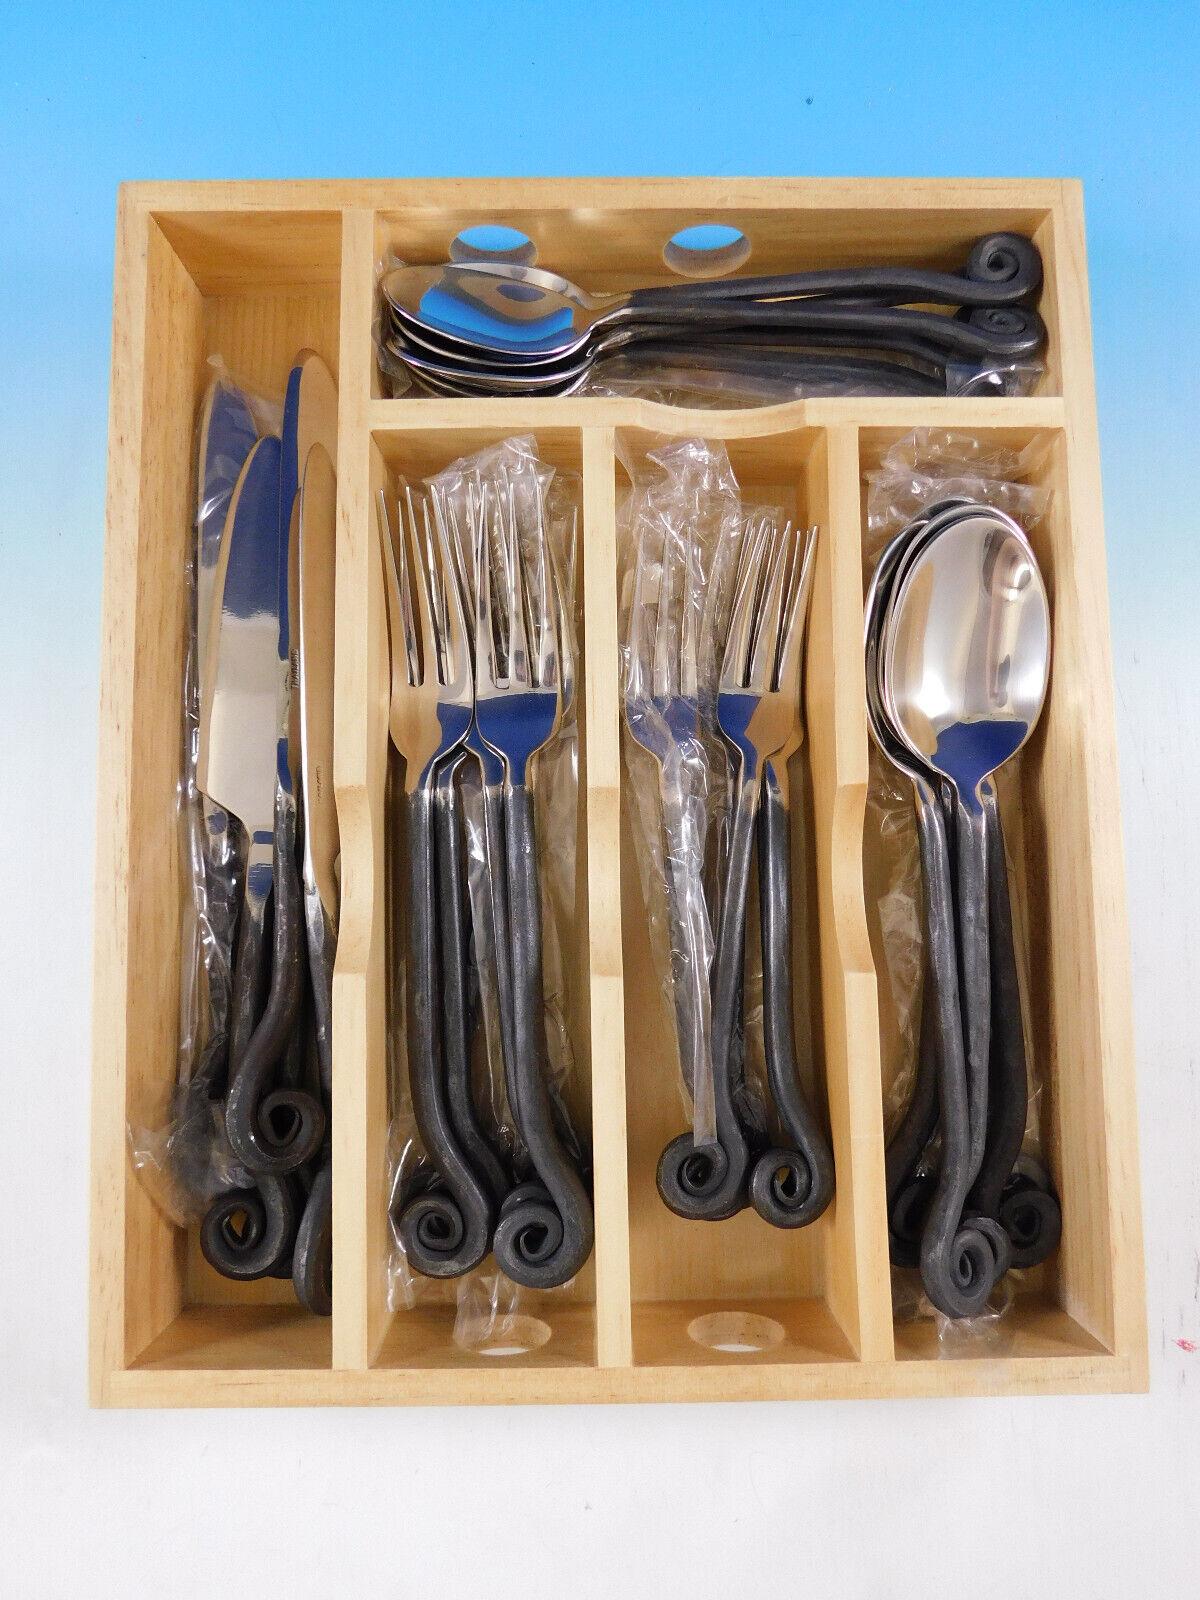 Fiddlehead by Pottery Barn oxidized stainless steel Flatware set, 30 pieces. 
A very similar cutlery is featured in Harry Potter Chamber of Secrets in Hogwort's Great Dining Hall! (See 5th & 6th photo in this listing of still photos from the